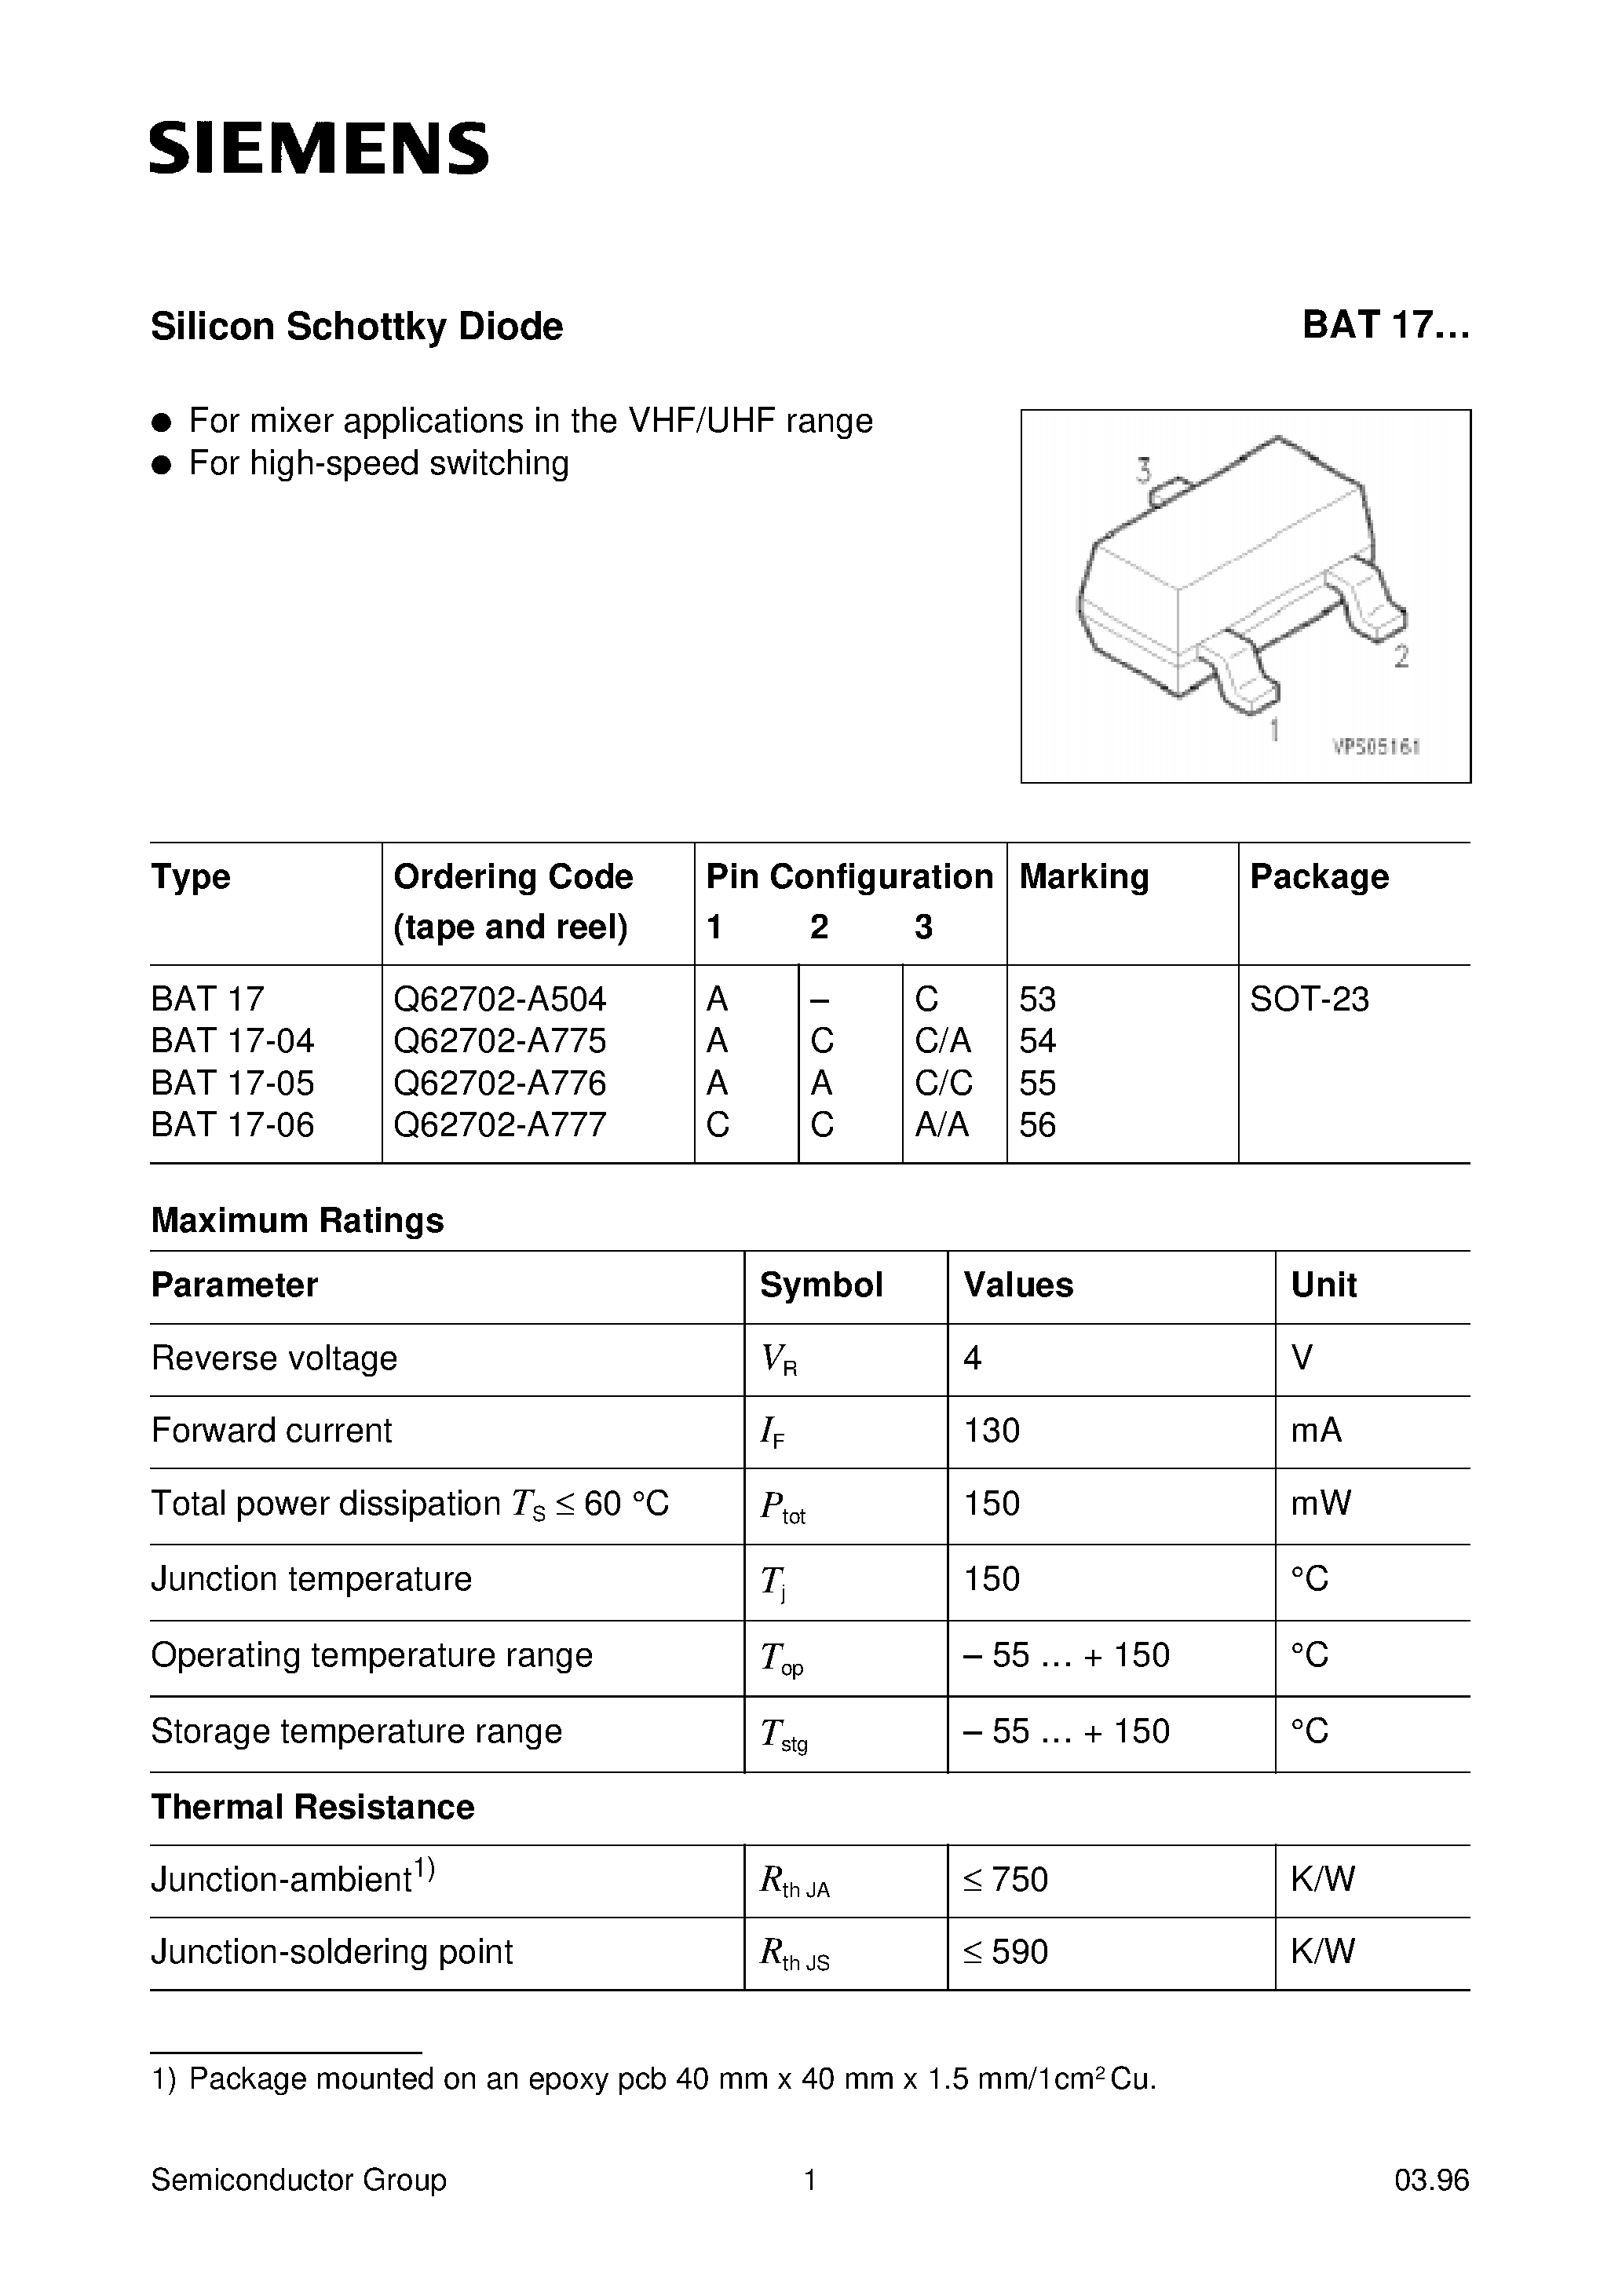 Datasheet BAT17-05 - Silicon Schottky Diode (For mixer applications in the VHF/UHF range For high-speed switching) page 1